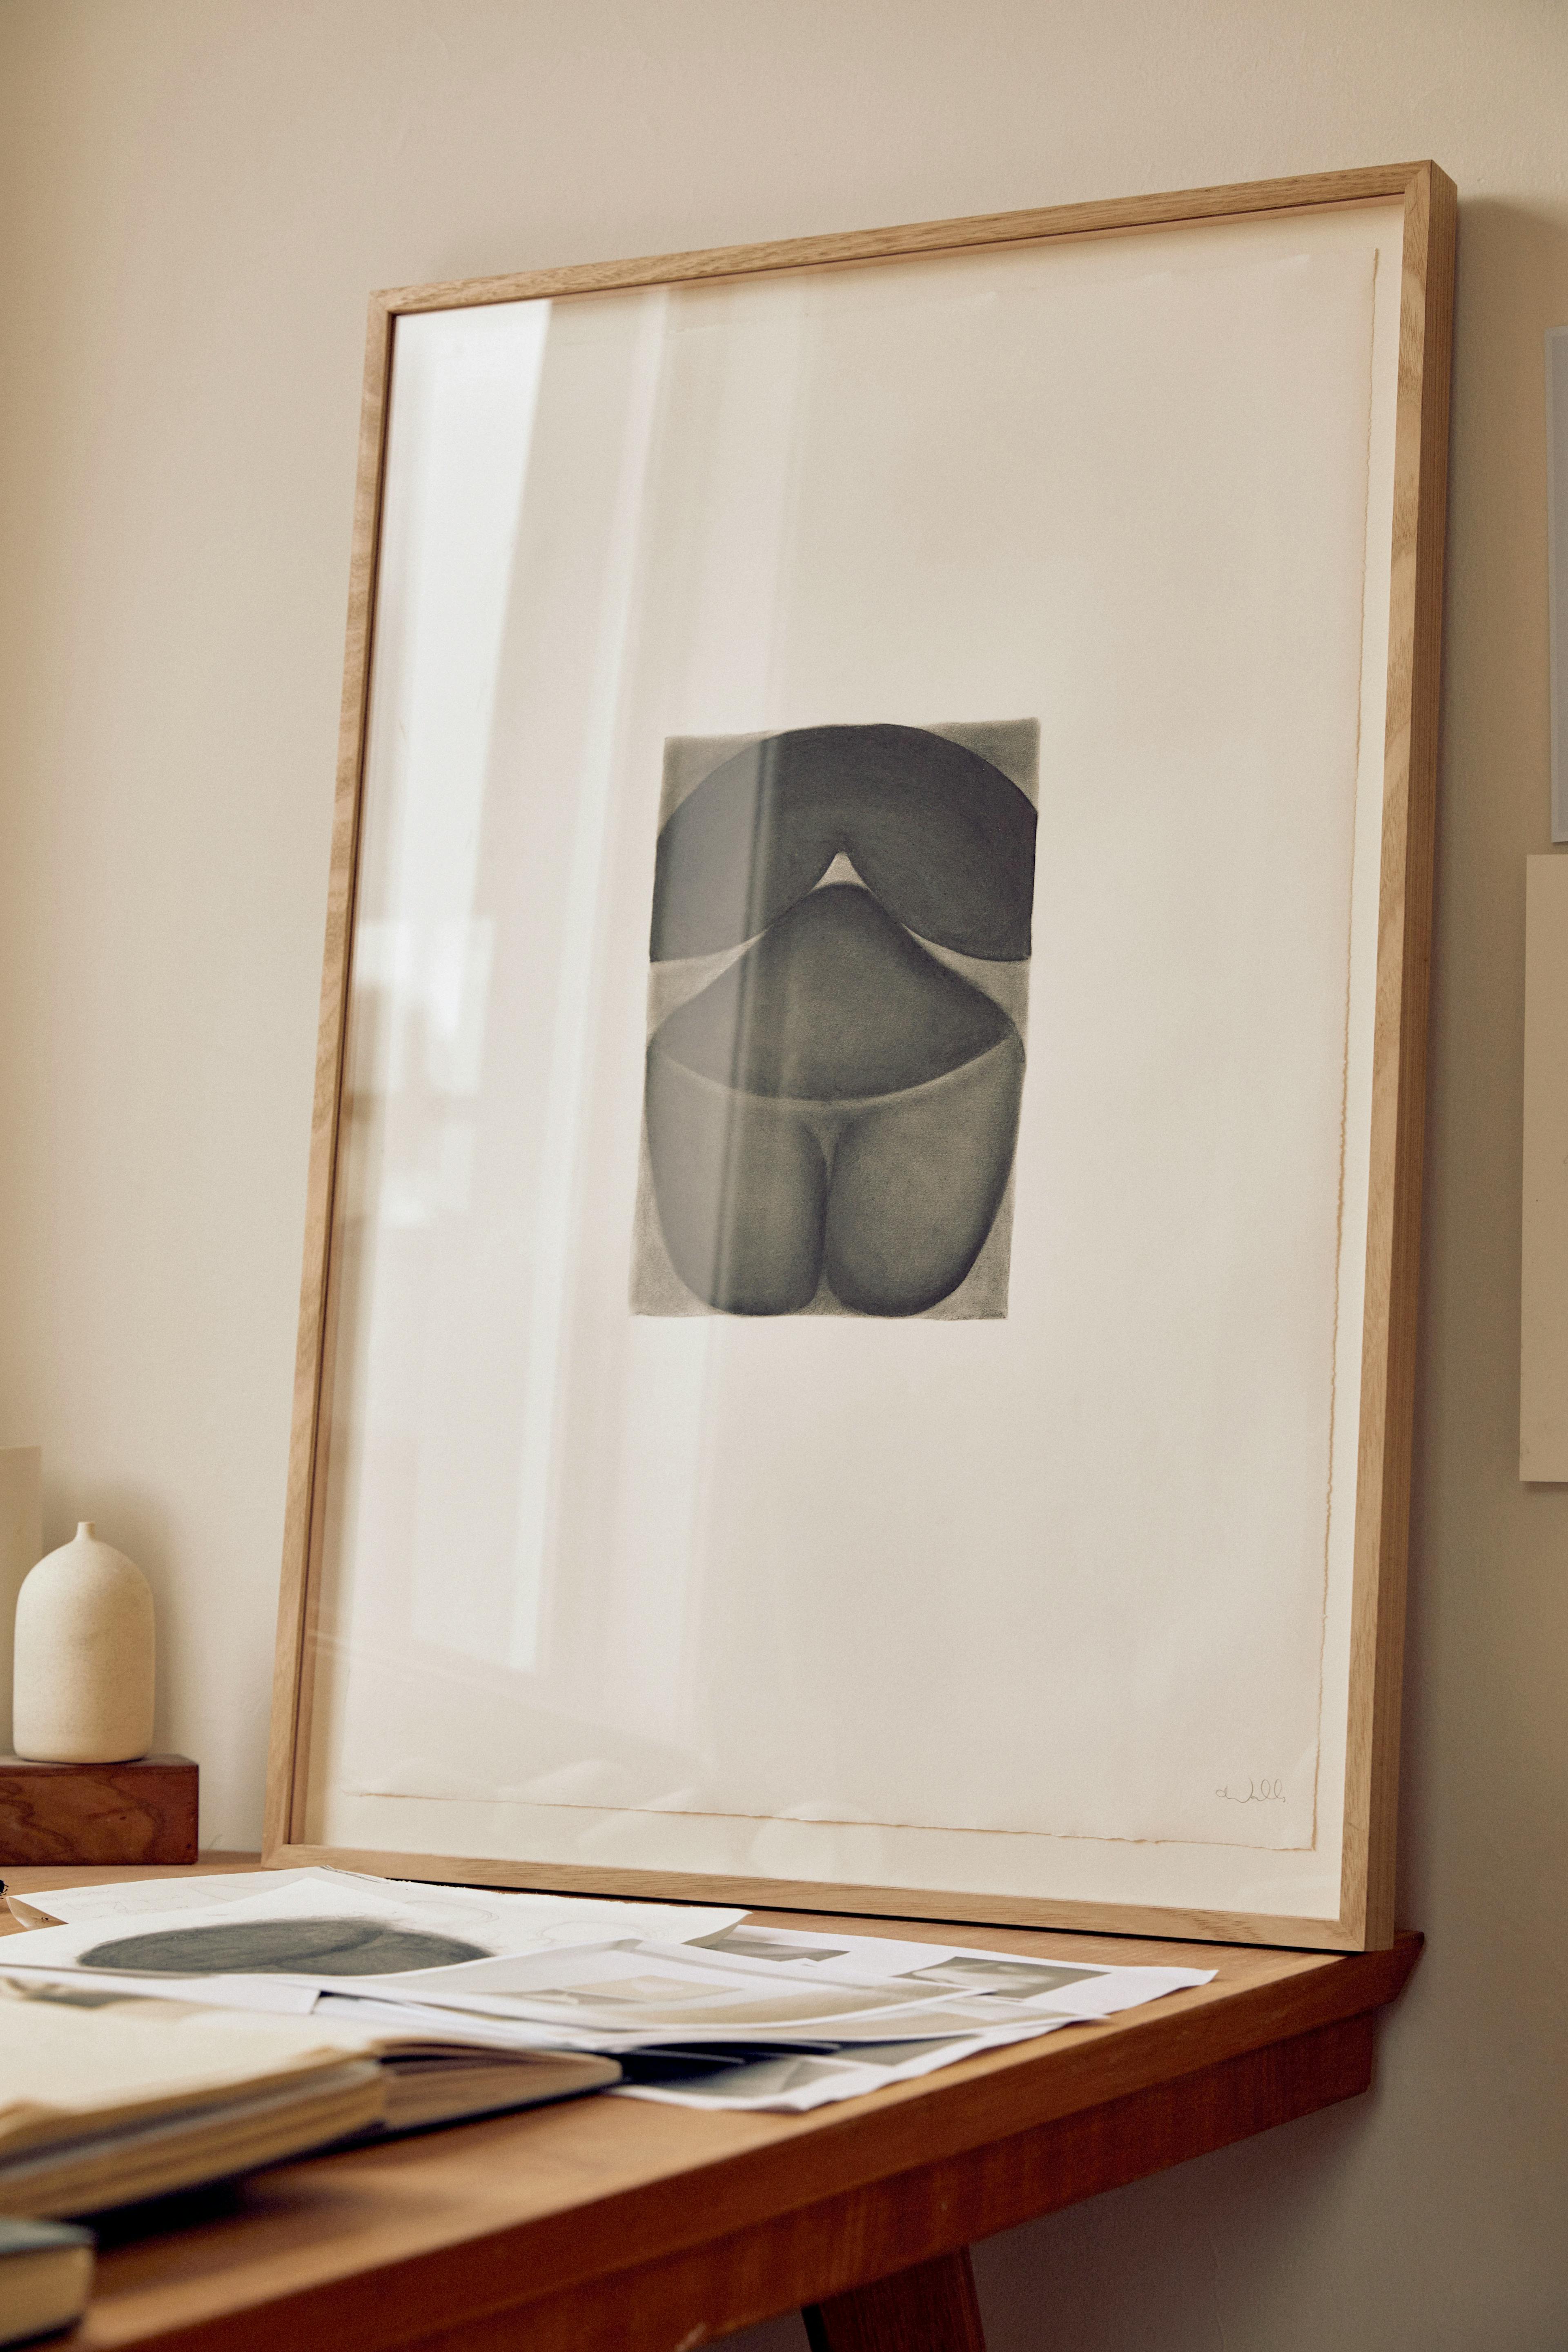 A charcoal drawing of an abstract figure framed in wood sits on a table at Caroline Walls' studio.